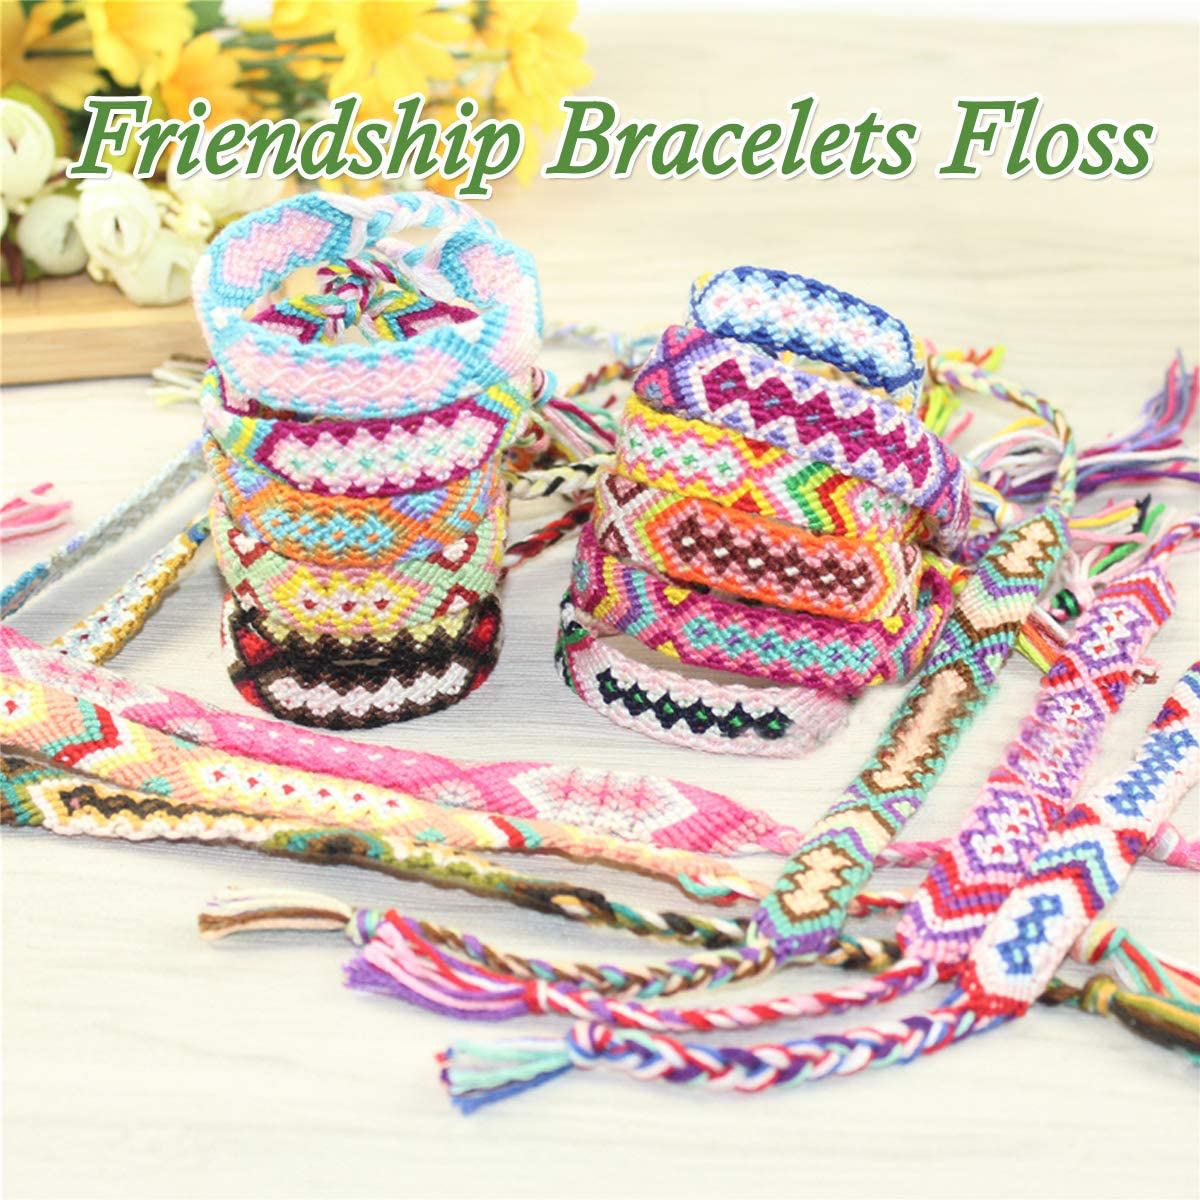 Embroidery Floss 240 skeins 100% Egyptian long-staple cotton Cross Stitch Threads -Friendship Bracelets String -Mercerized Crafts Floss total 1920M 8M/pc 24pcs/bag 10package